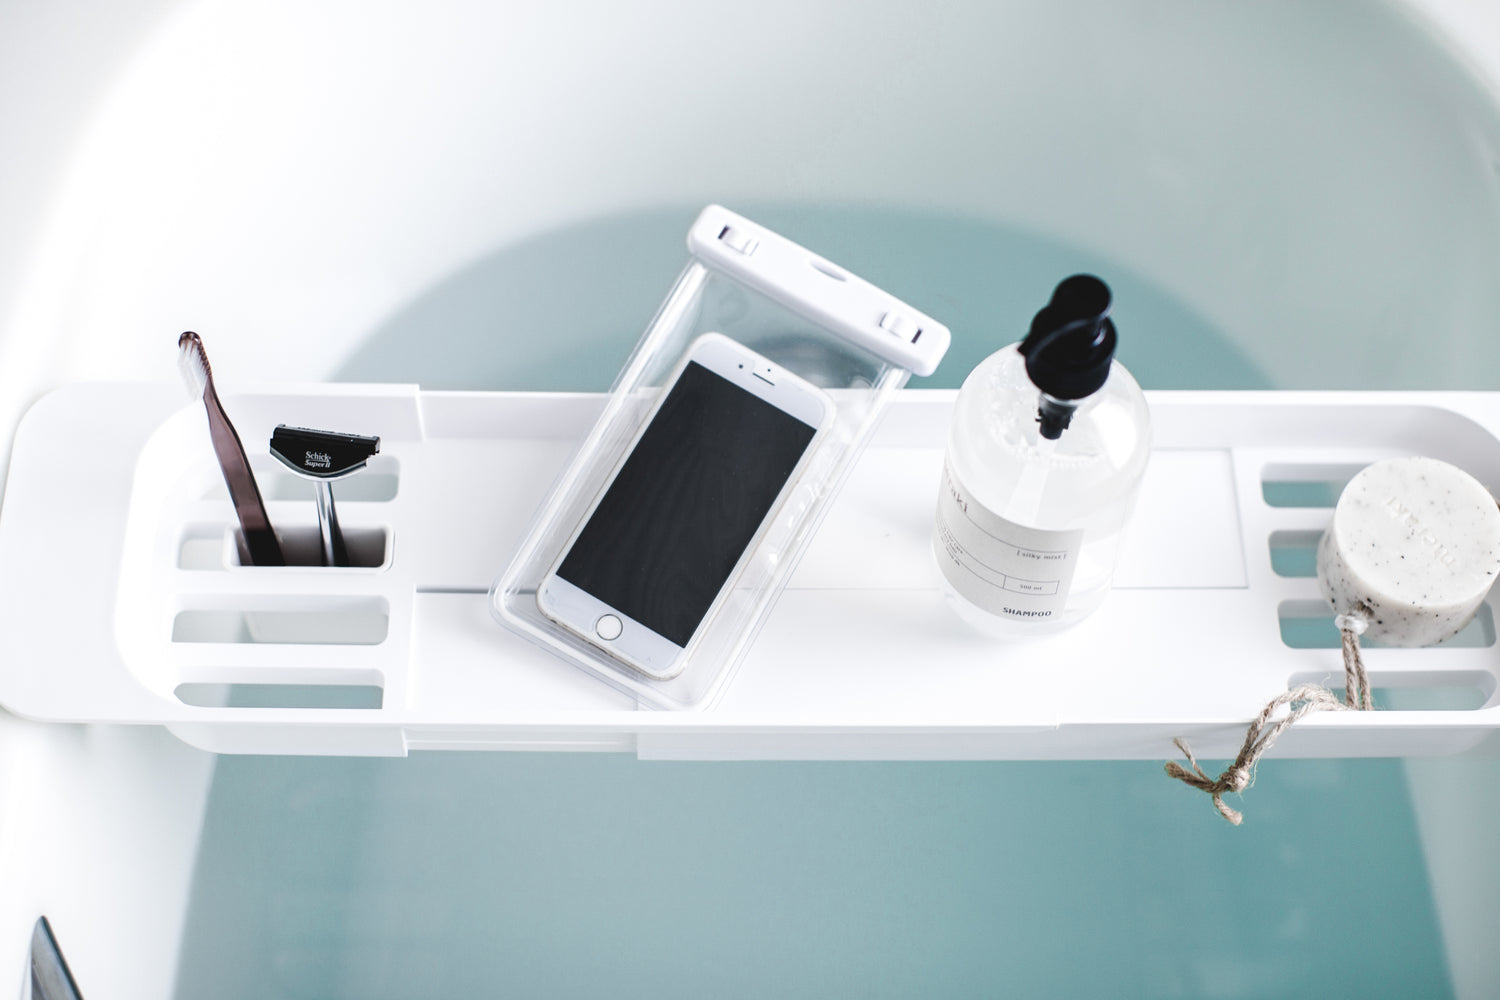 View 4 - Aerial view of white Expandable Bathtub Caddy holding phone and beauty products by Yamazaki Home.